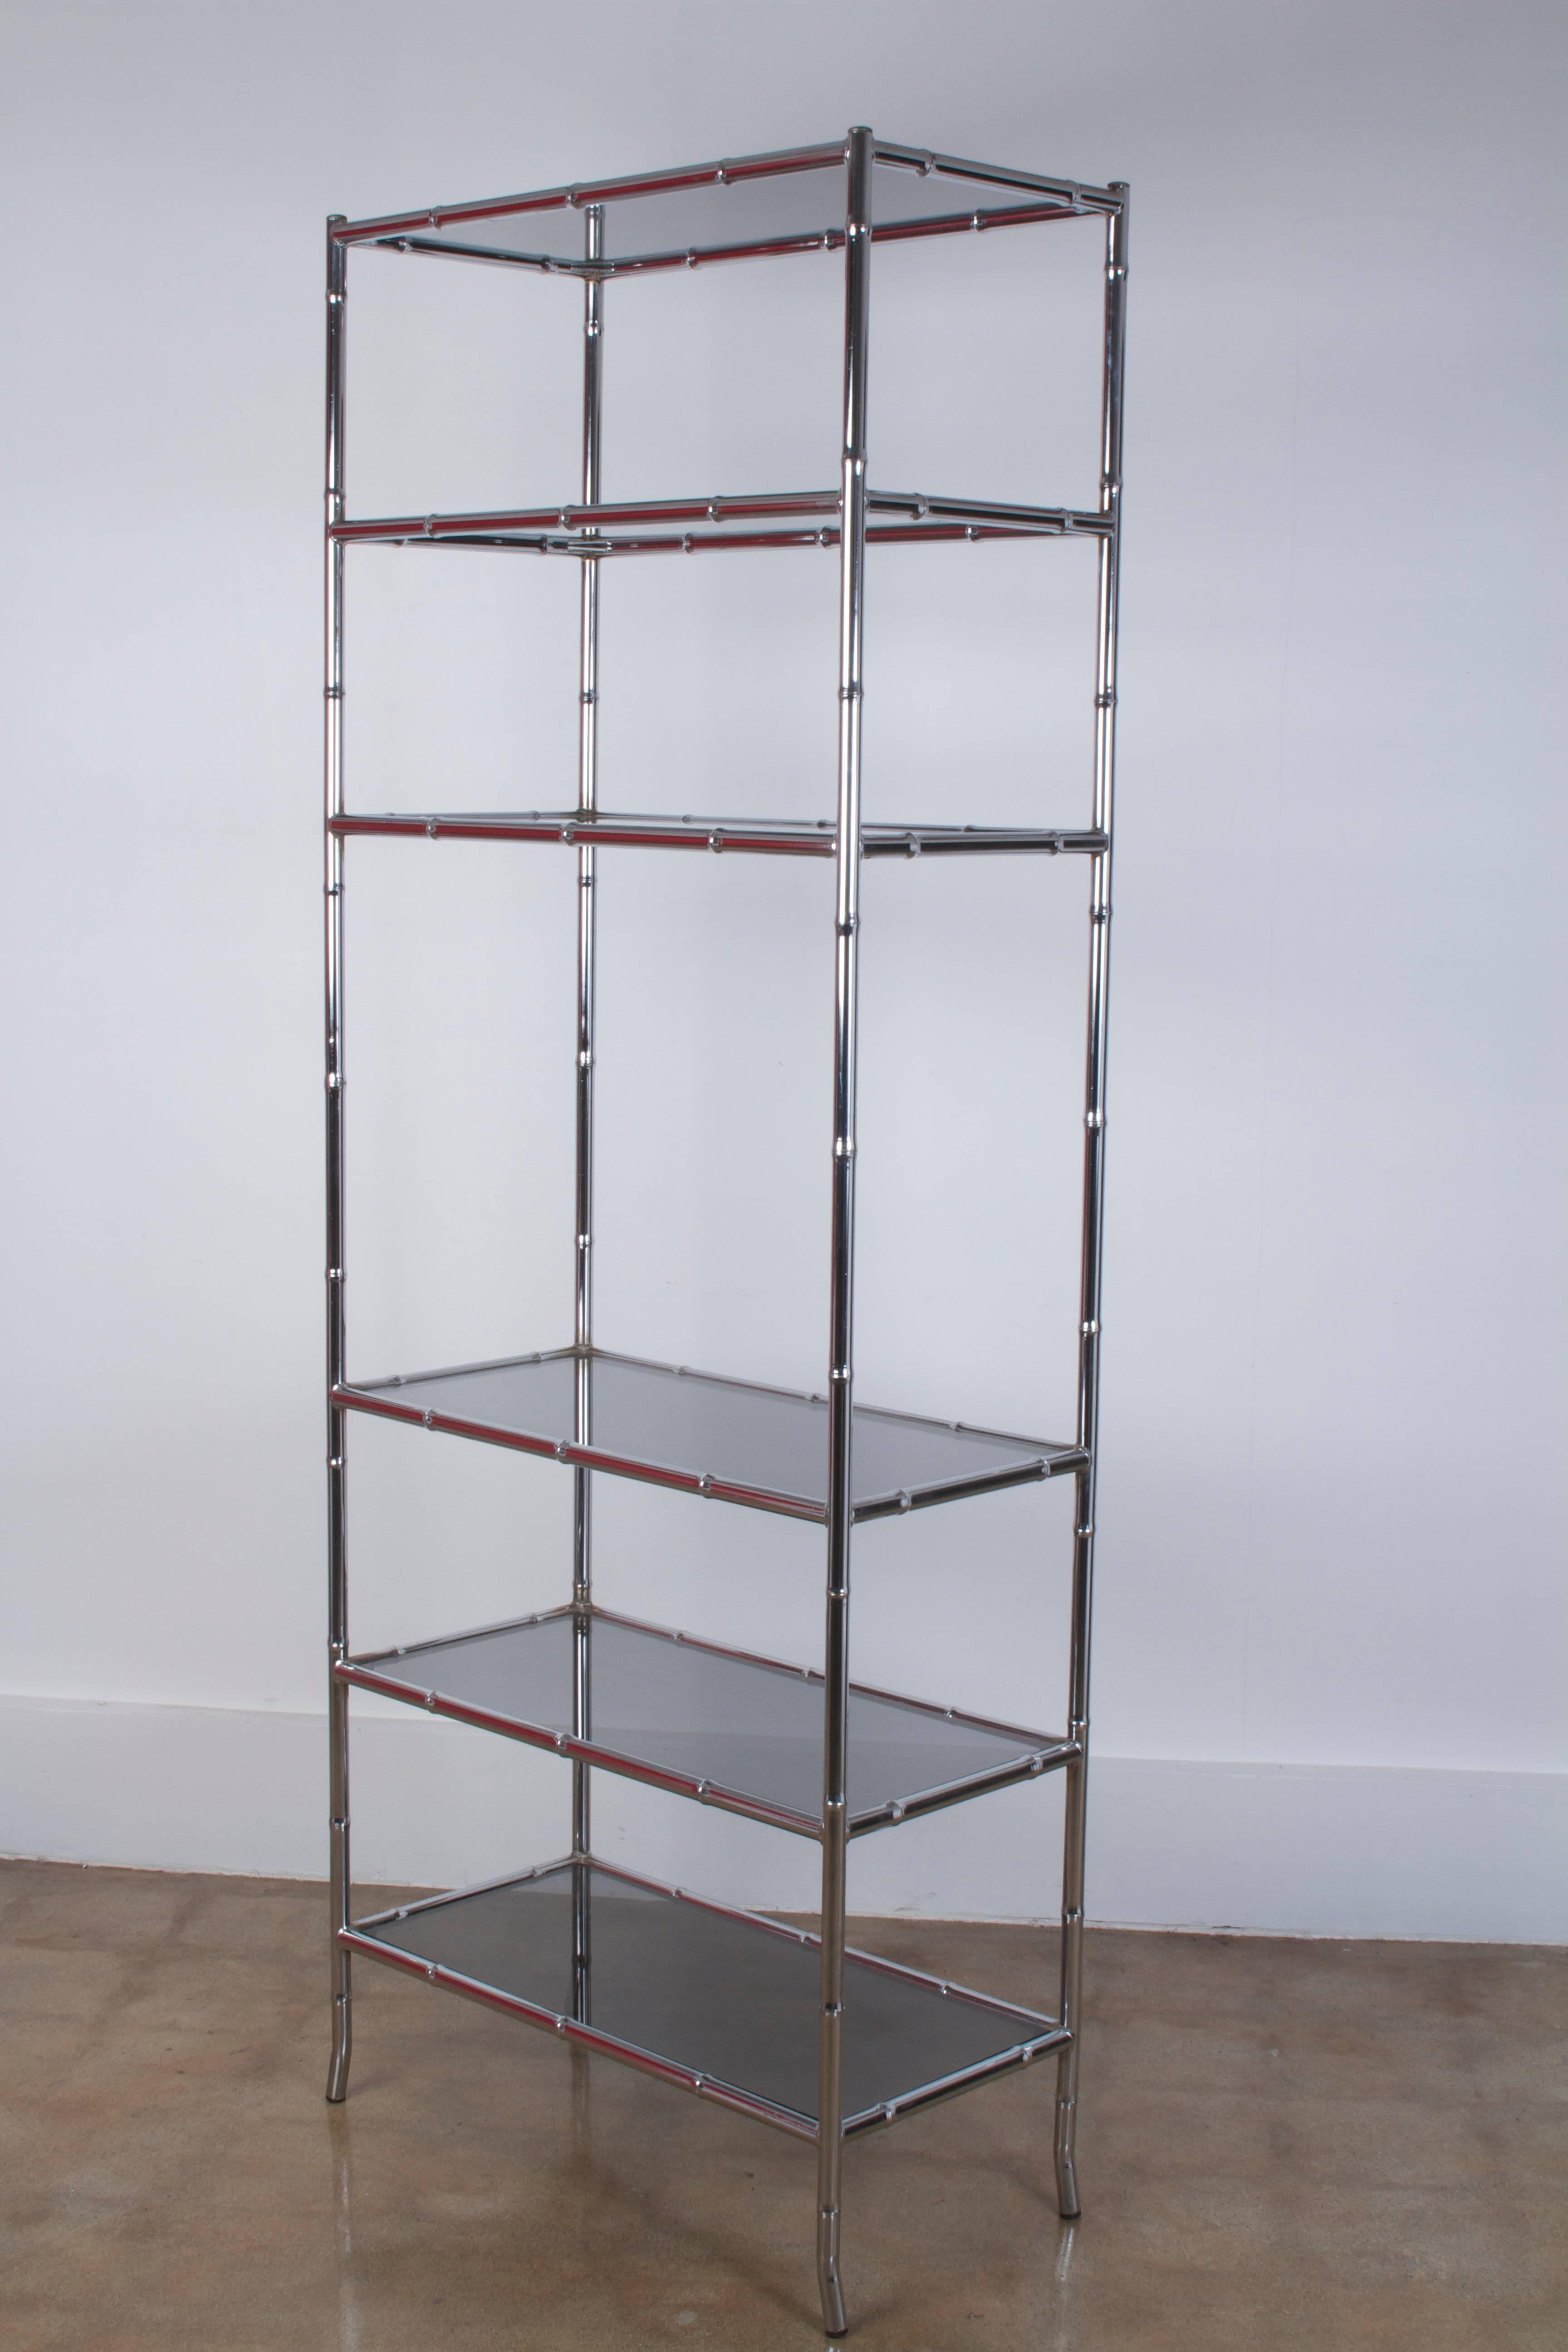 Chrome chinoiserie etagere with smoke glass shelves

Origin: USA

Period: 1970-1979

Materials: Chrome, metal, glass

Condition: Very good. Light patina/ wear to metal frame and glass consistent with age and use. Chrome